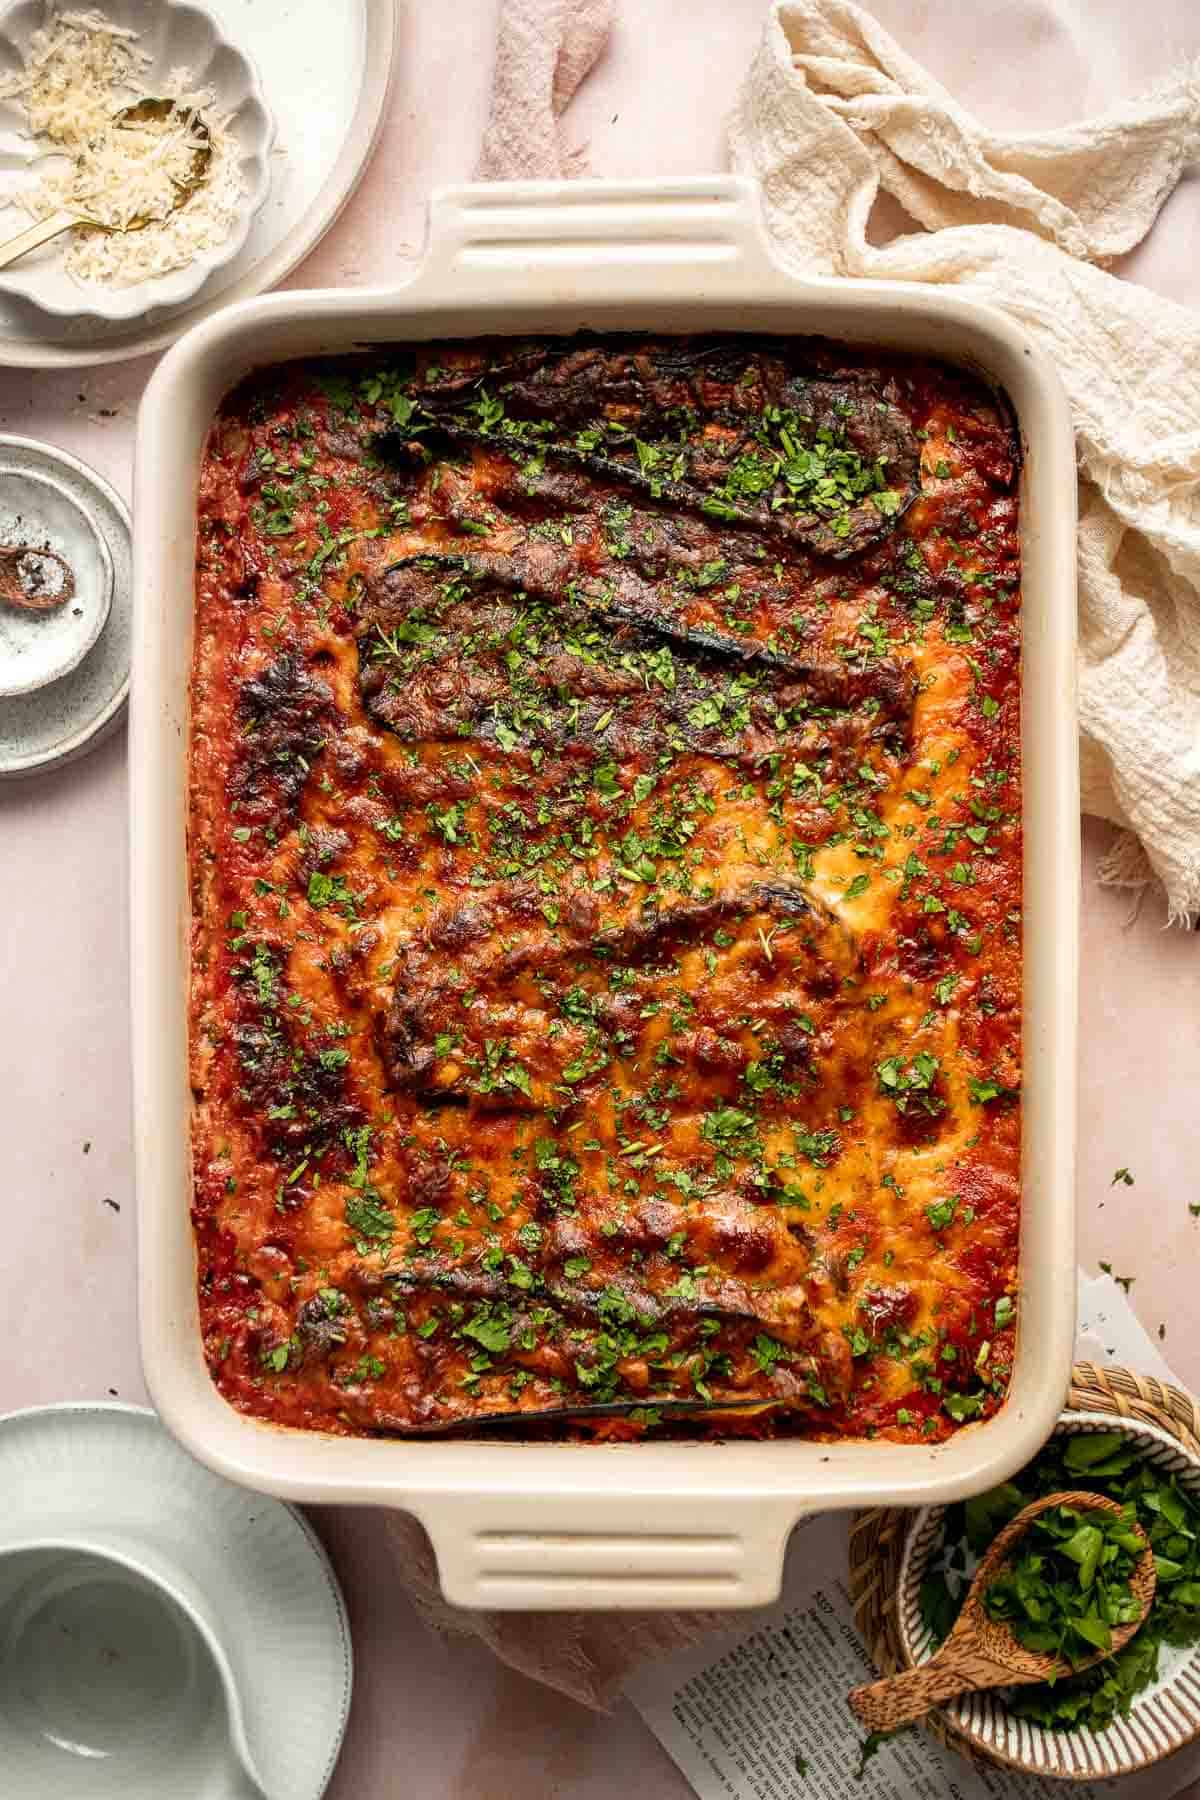 This Eggplant Lasagna is cheesy, saucy, and packed with layers of roasted eggplant, mushrooms, and melty cheese. It's gluten-free and vegetarian too. | aheadofthyme.com